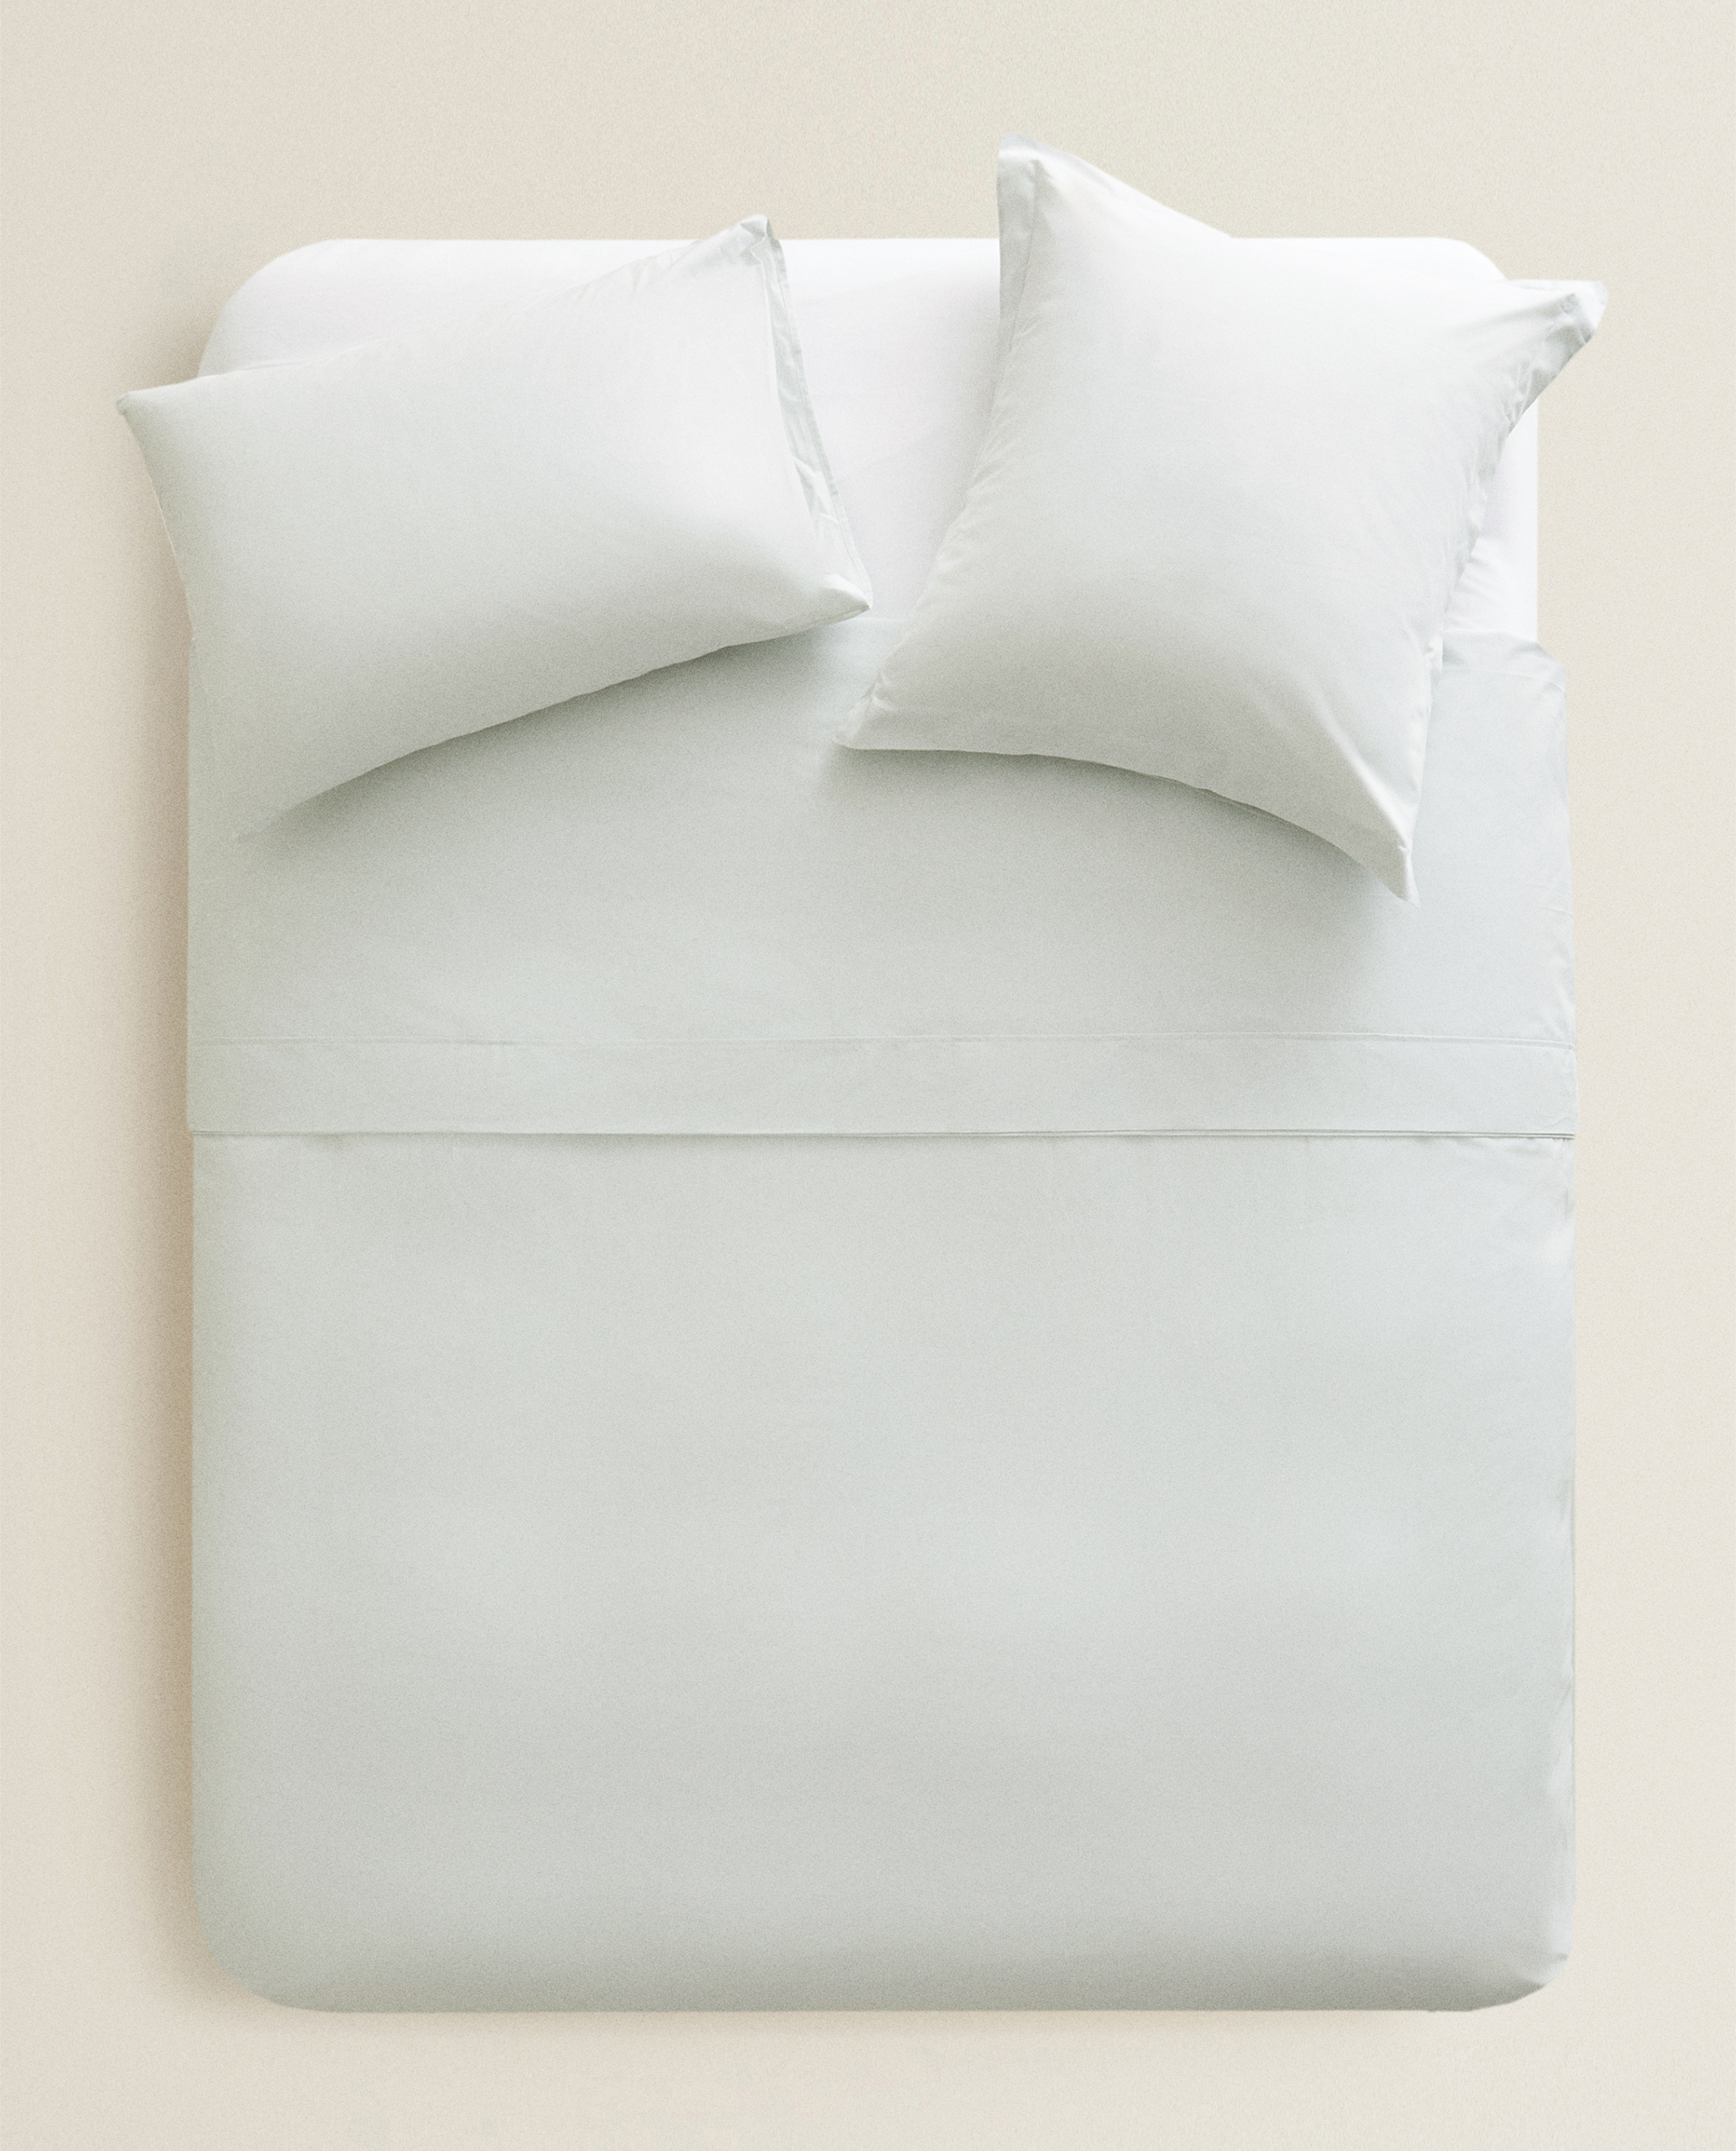 Percale Cotton Duvet Cover Fitted Sheets Bed Linen Bedroom